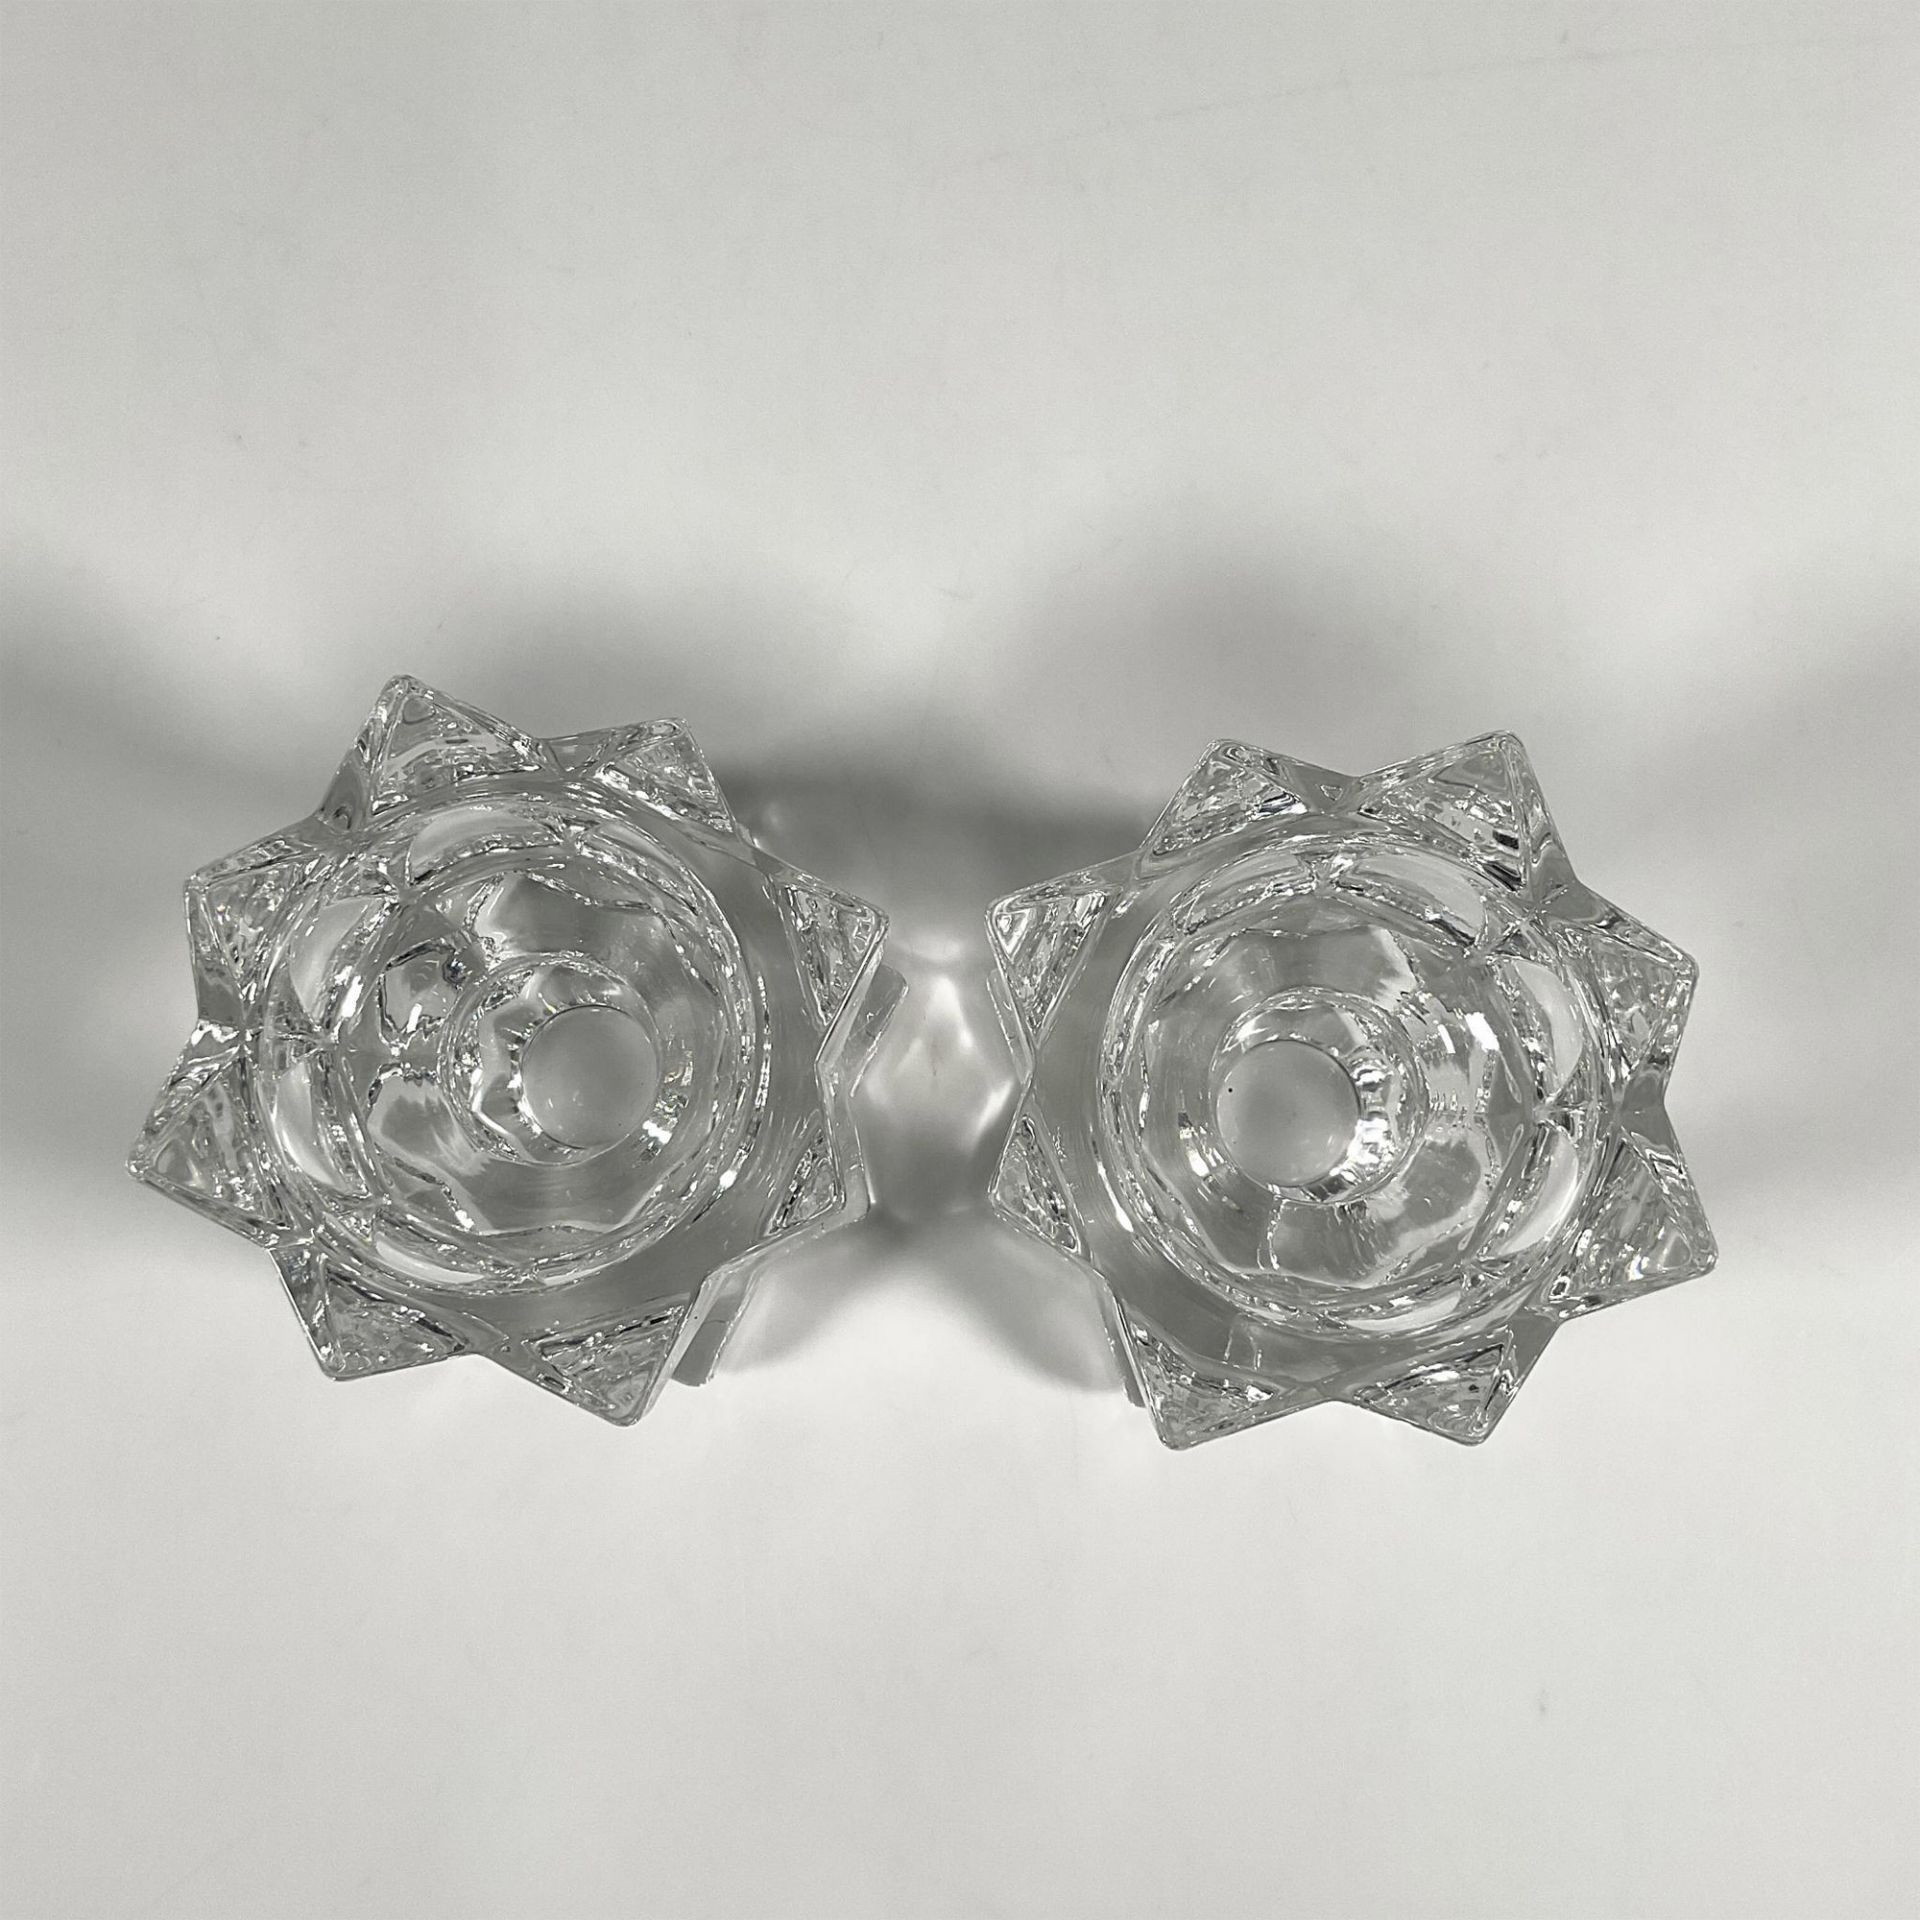 2pc Clear Crystal Candlesticks - Image 2 of 3